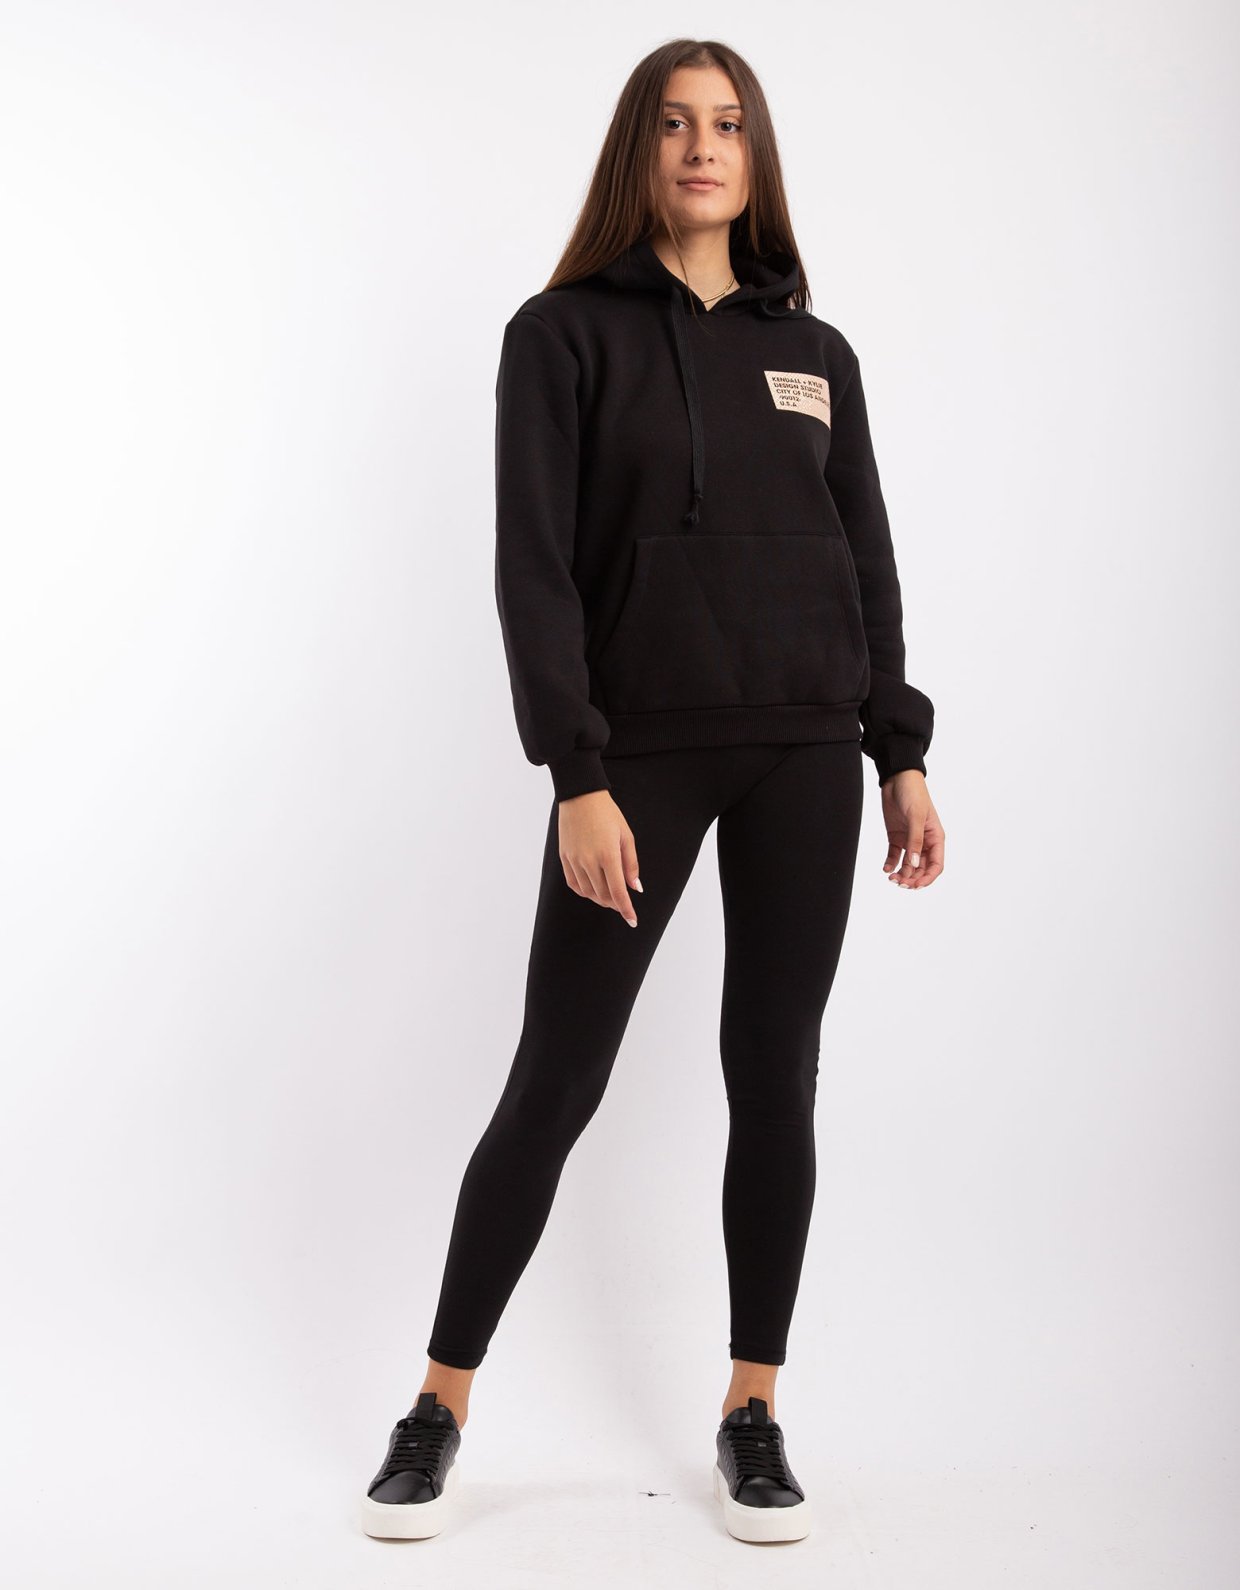 Kendall + Kylie Active hoody sweater classic black